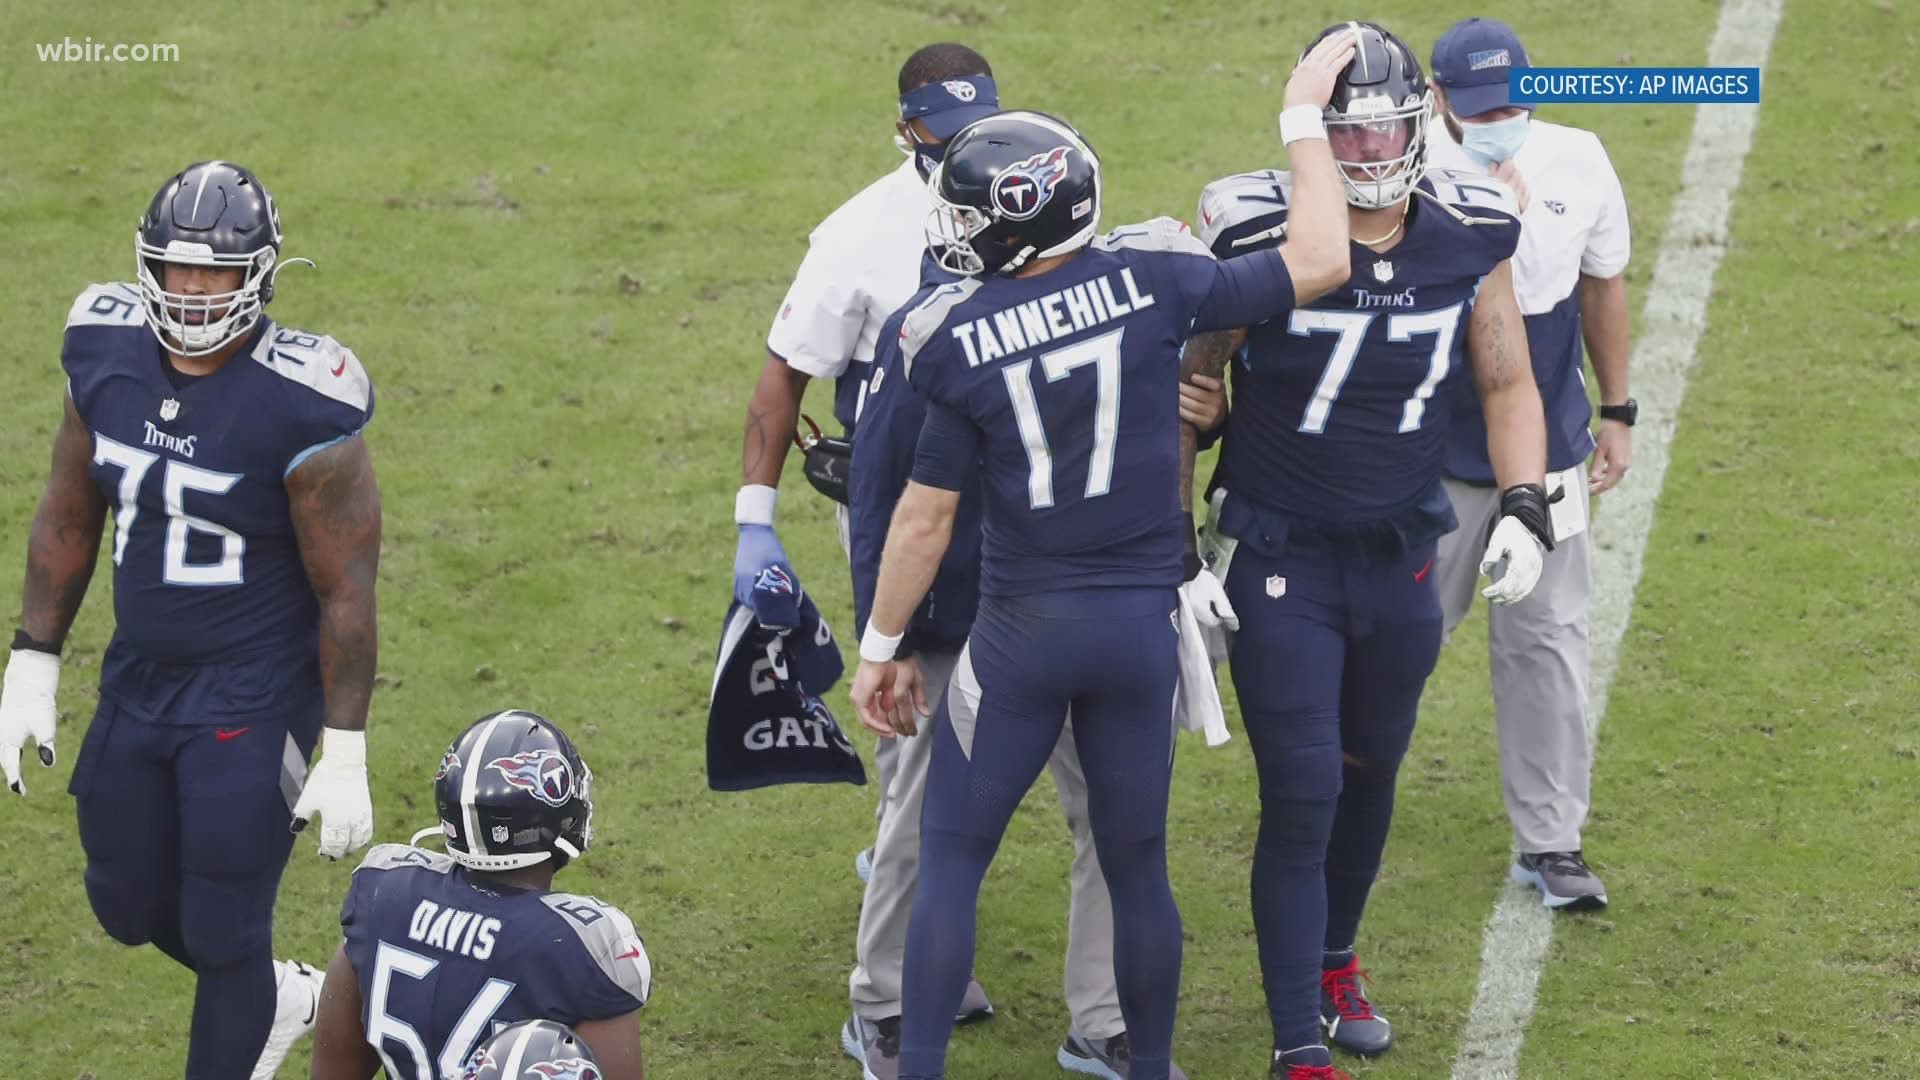 The Titans' left tackle announced the injury on Twitter Monday afternoon.